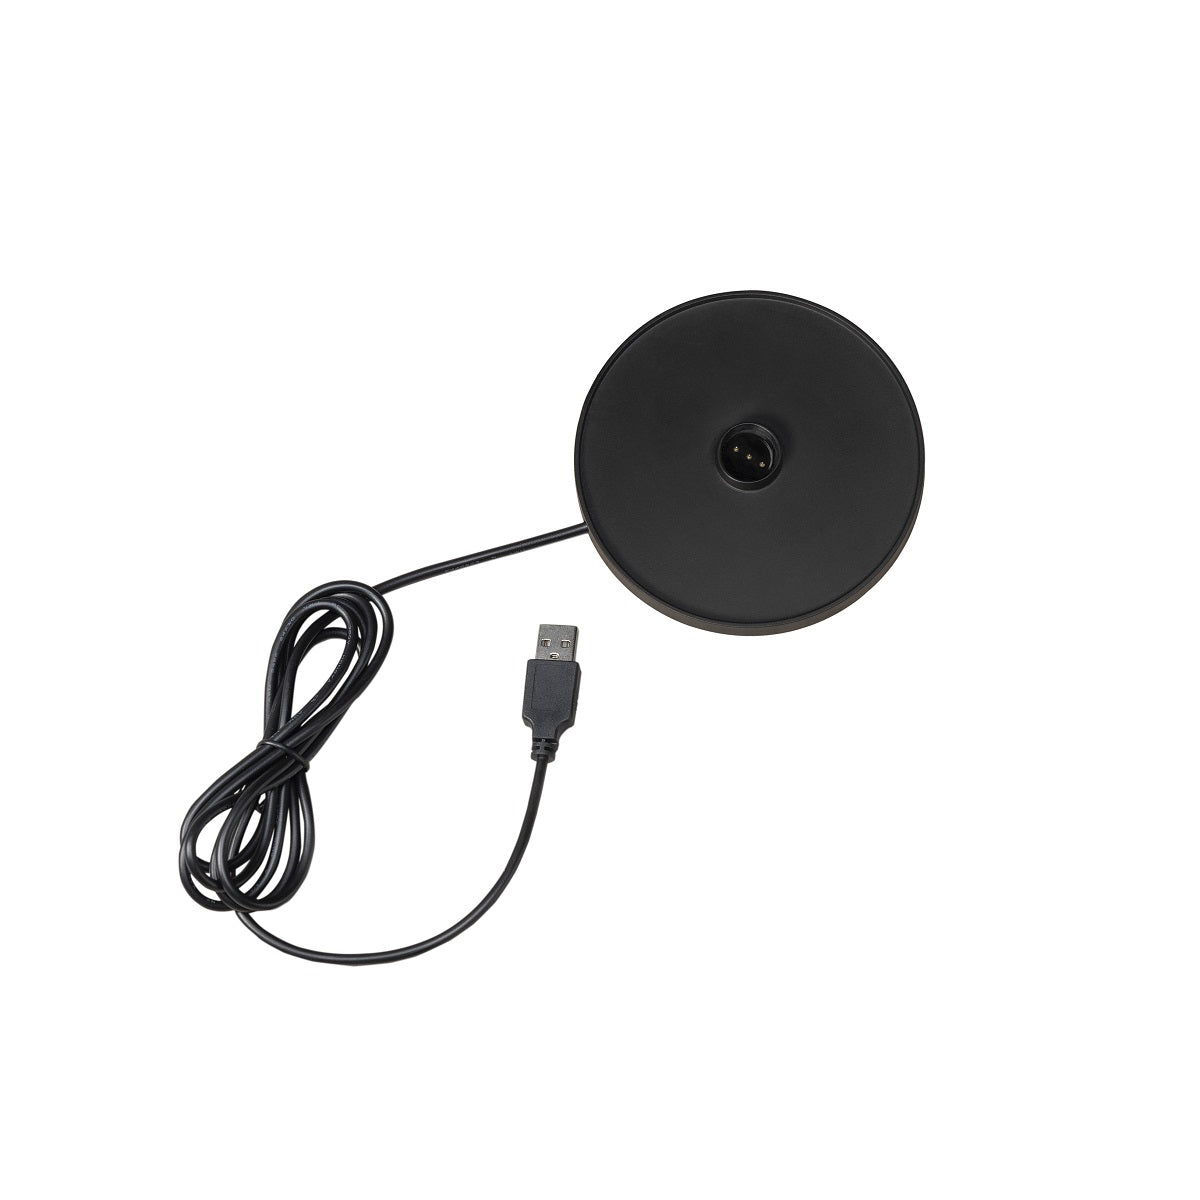 Positano Black Table Lamp Usb Dimmable